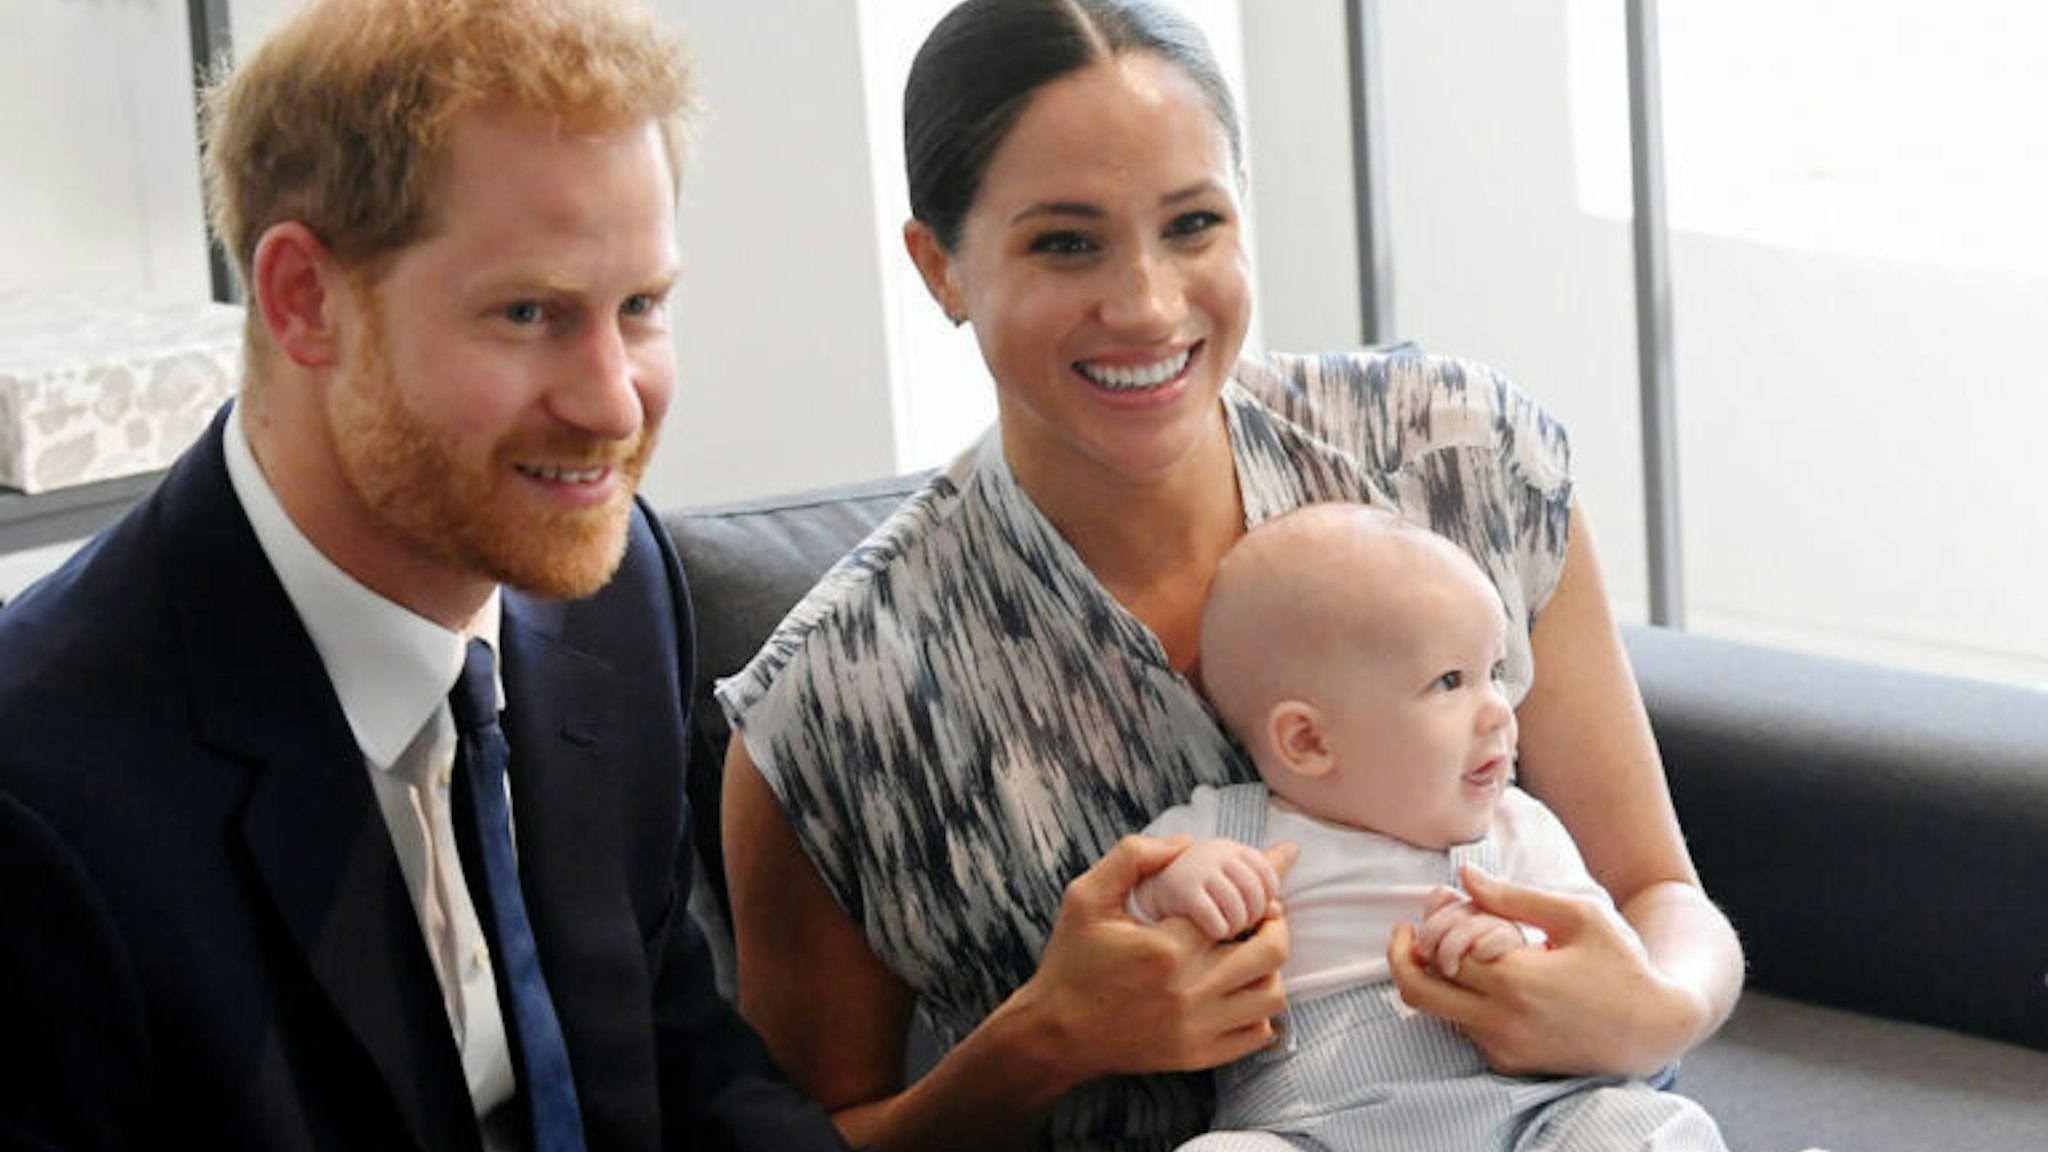 Britain's Prince Harry and his wife Meghan, Duchess of Sussex, holding their son Archie, meet Archbishop Desmond Tutu at the Desmond &amp; Leah Tutu Legacy Foundation in Cape Town, South Africa, September 25, 2019. REUTERS/Toby Melville/Pool